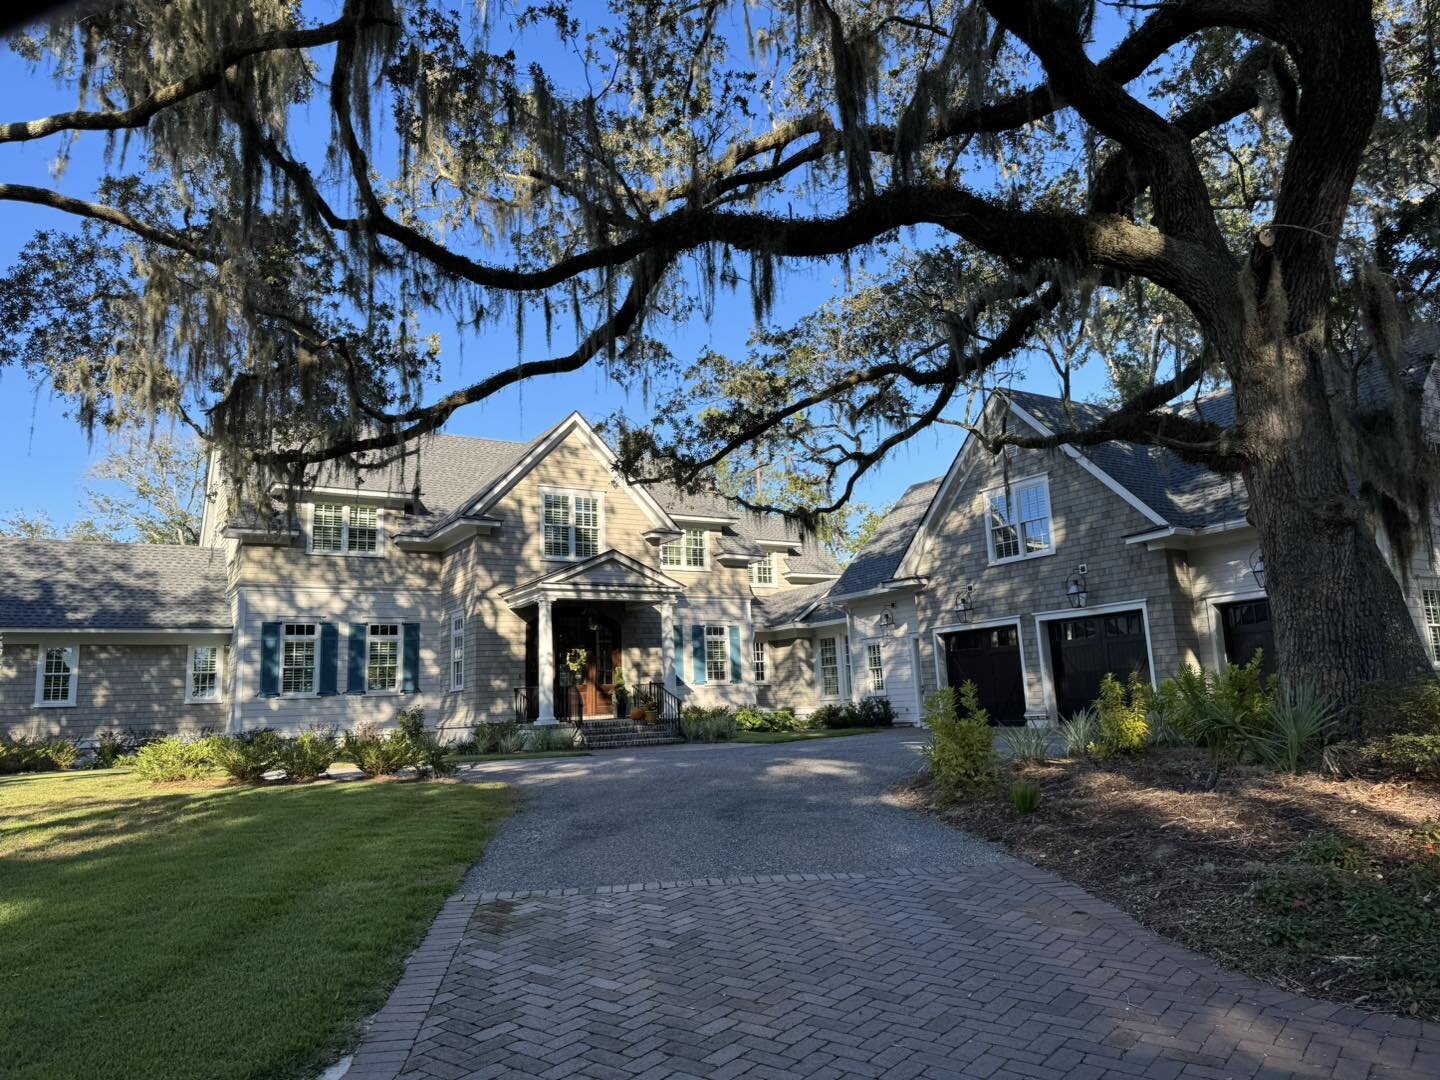 Catching up with past projects this morning in #colletonriver

Joe DePauw while at Parker Design Group Architects

Built by: Construction, Management &amp; Consulting Services, Hilton Head Island
#residentialarchitecture #customhome #architecture